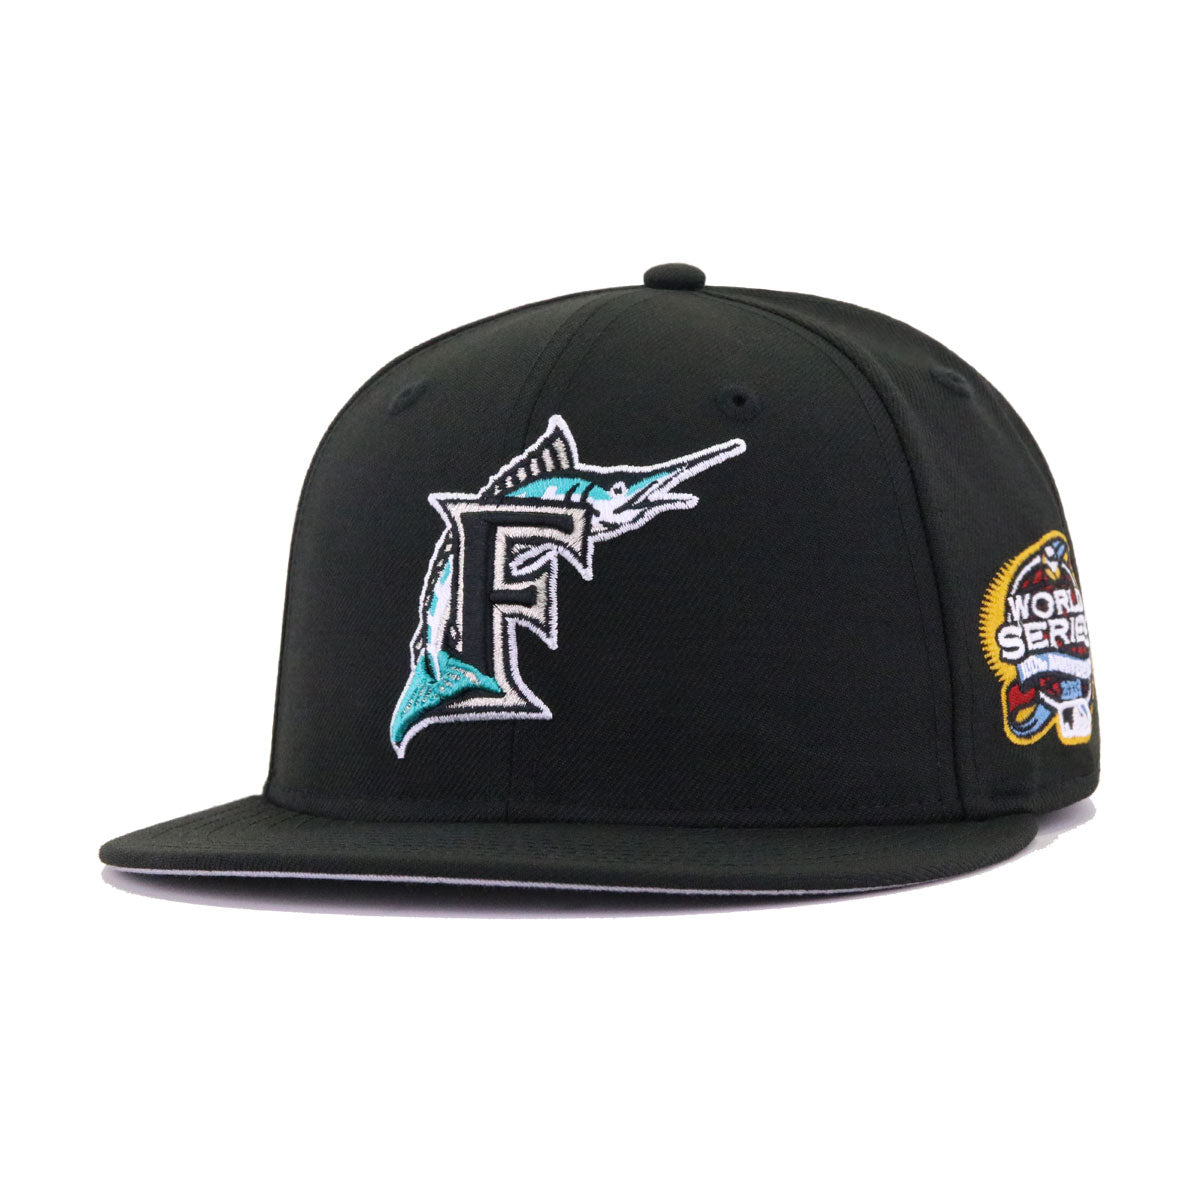 New Era 59FIFTY Miami Marlins 2003 World Series Champions Patch Hat - White, Teal, Orange 7 1/4